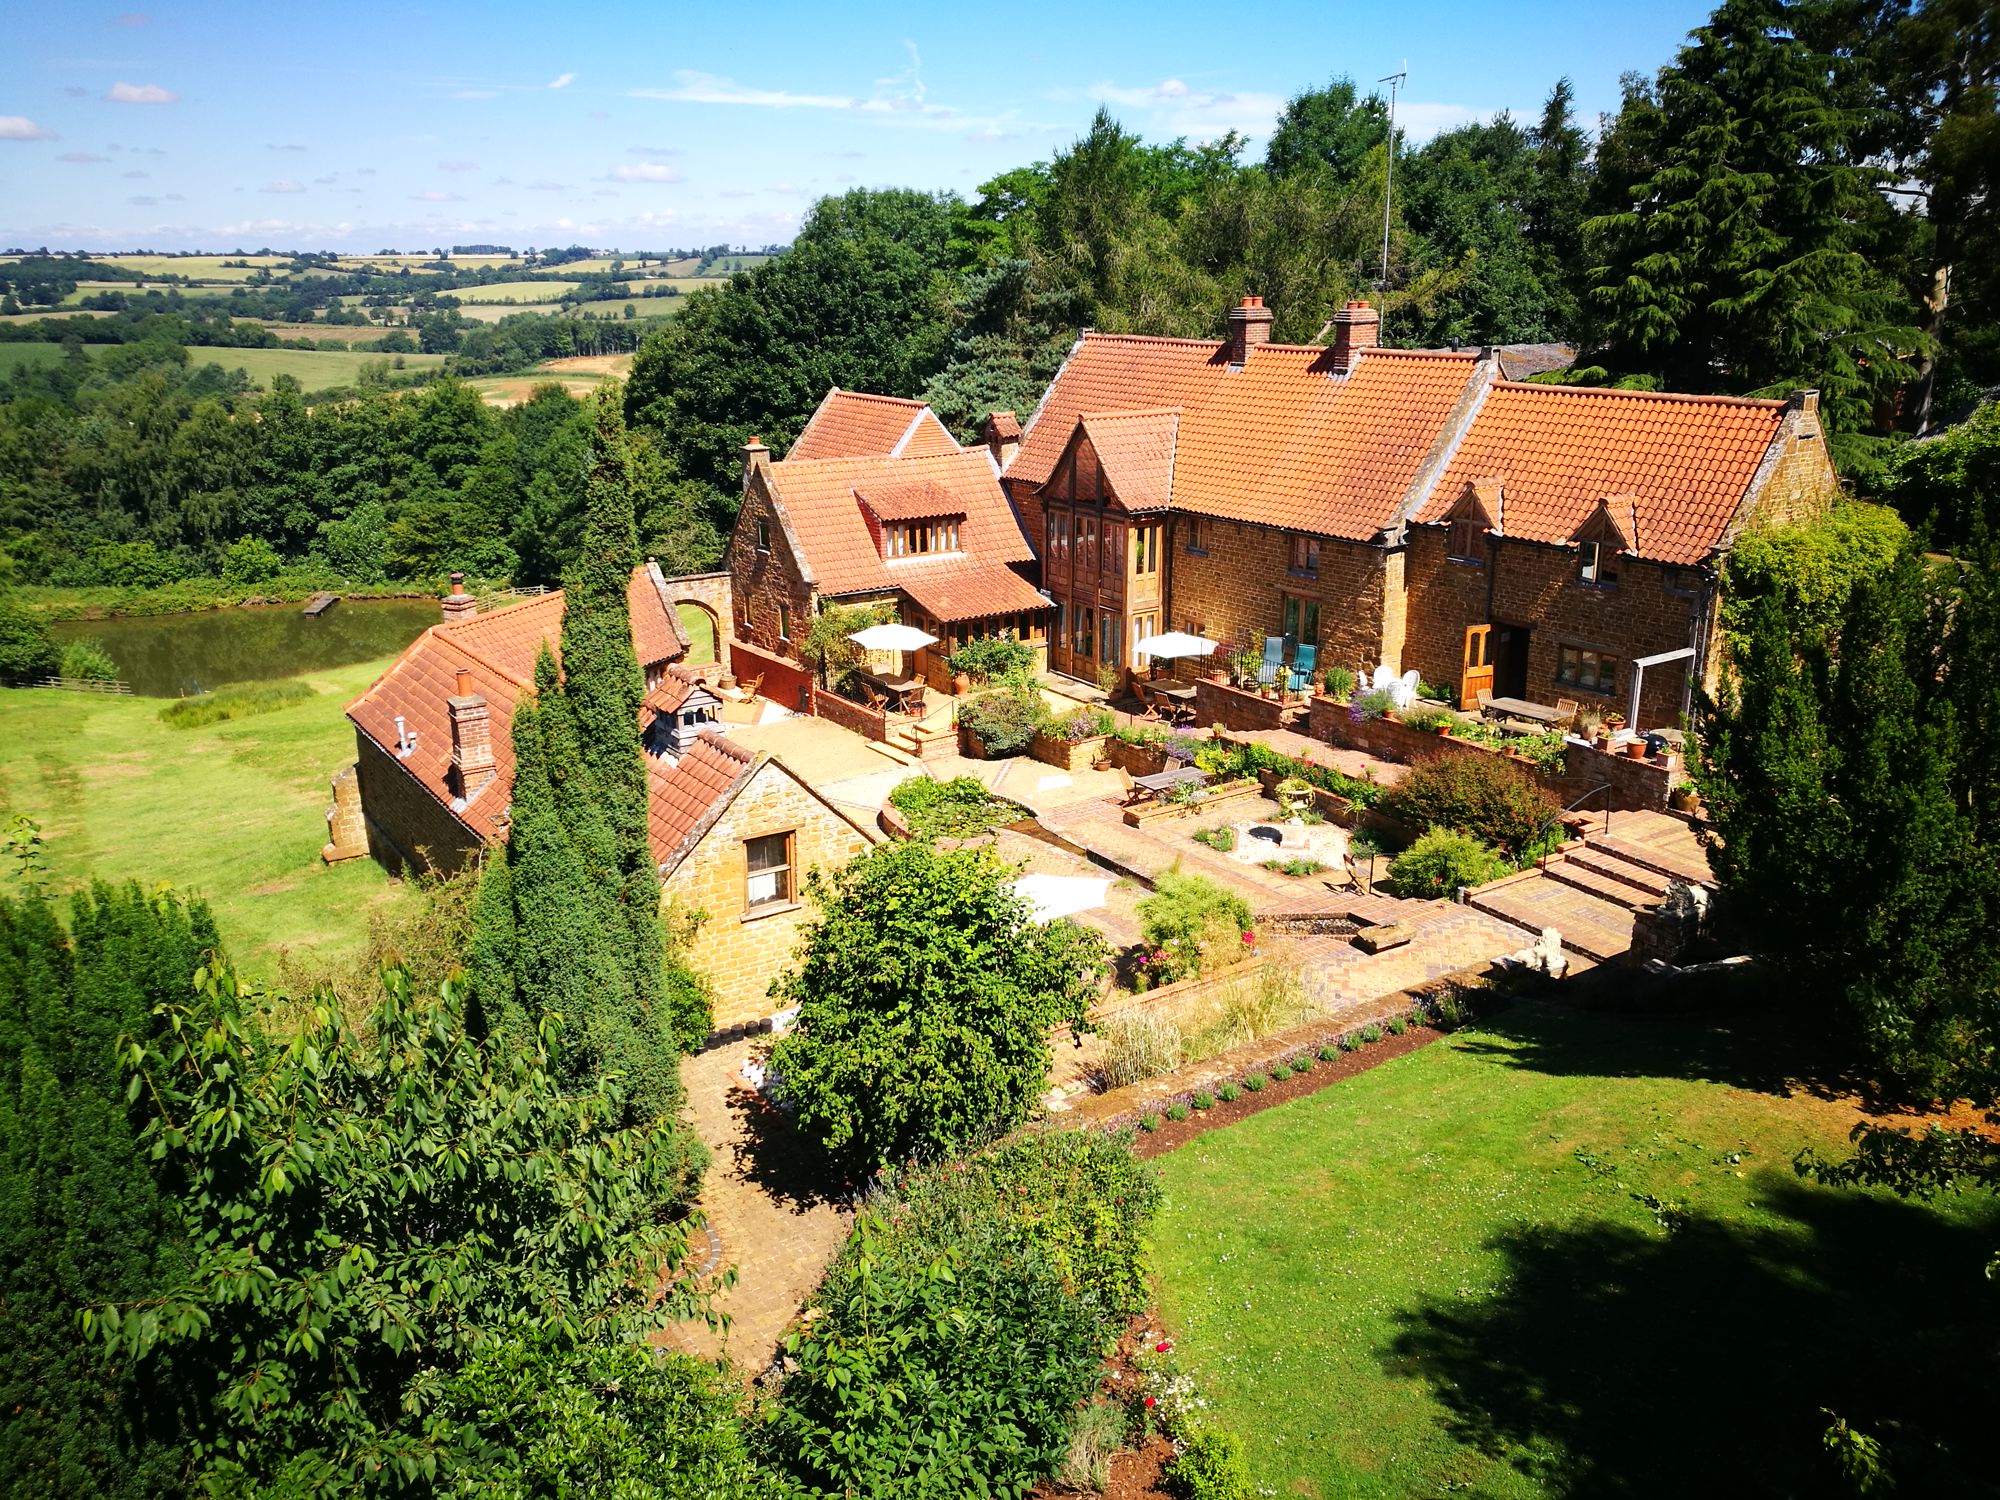 Self-Catering in Oxfordshire holidays at Cool Places